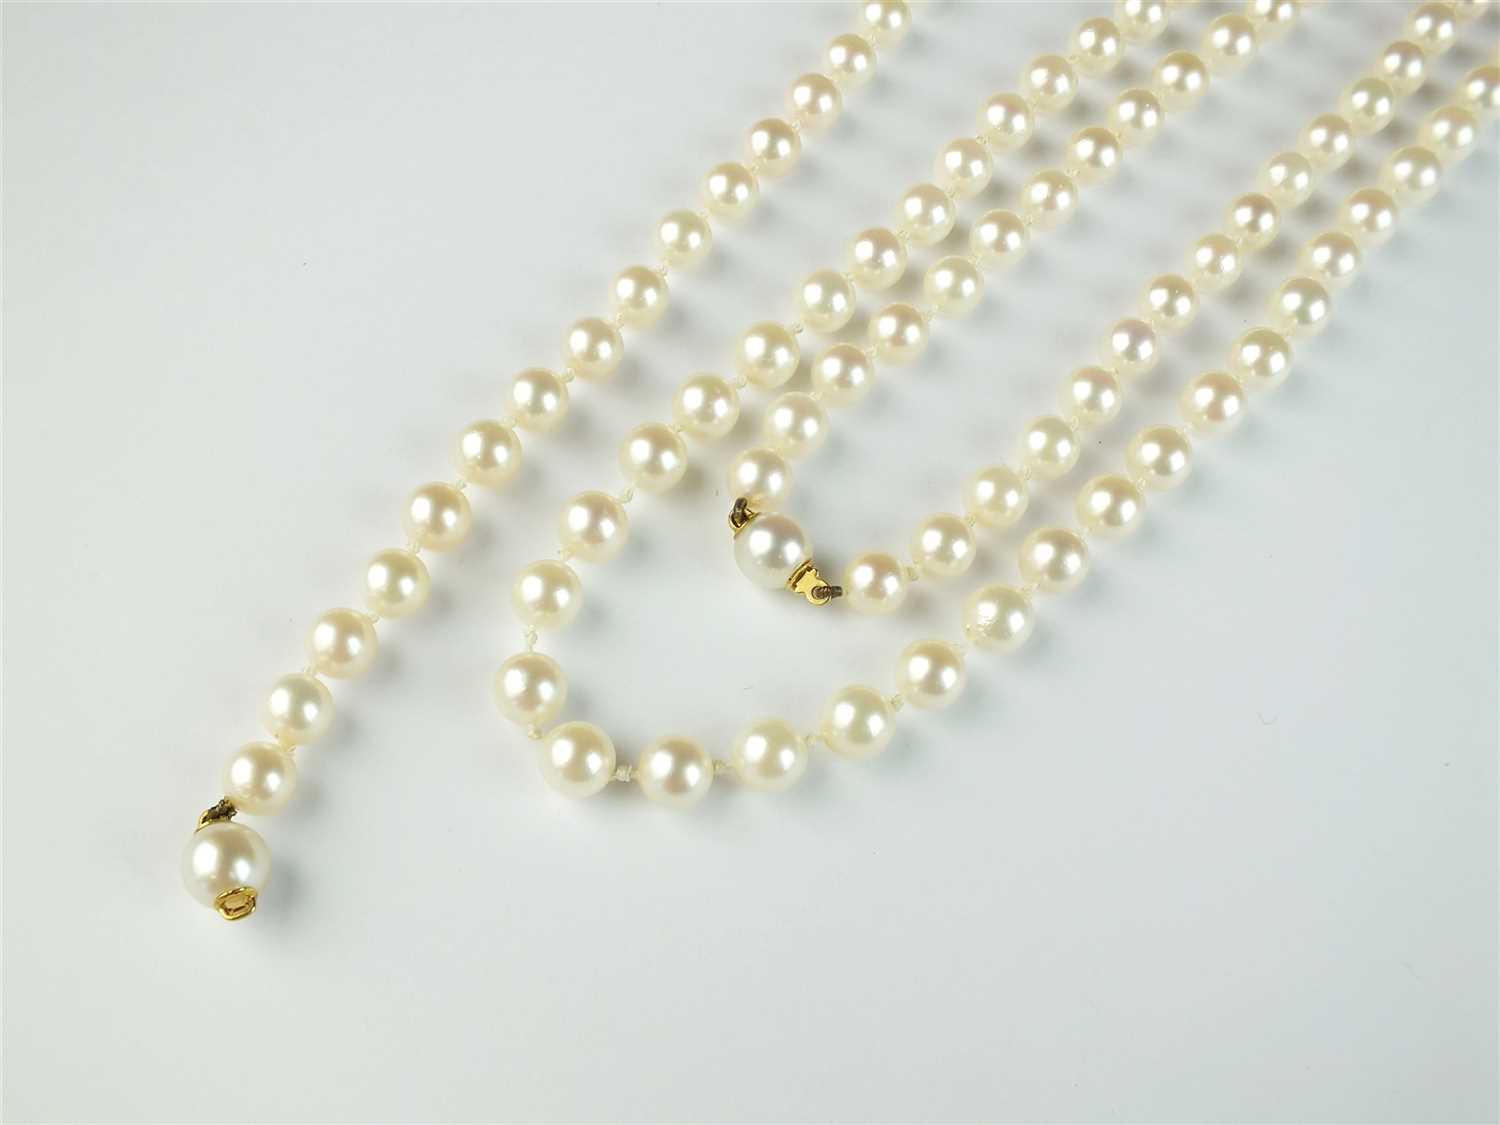 A cultured pearl necklace and bracelet